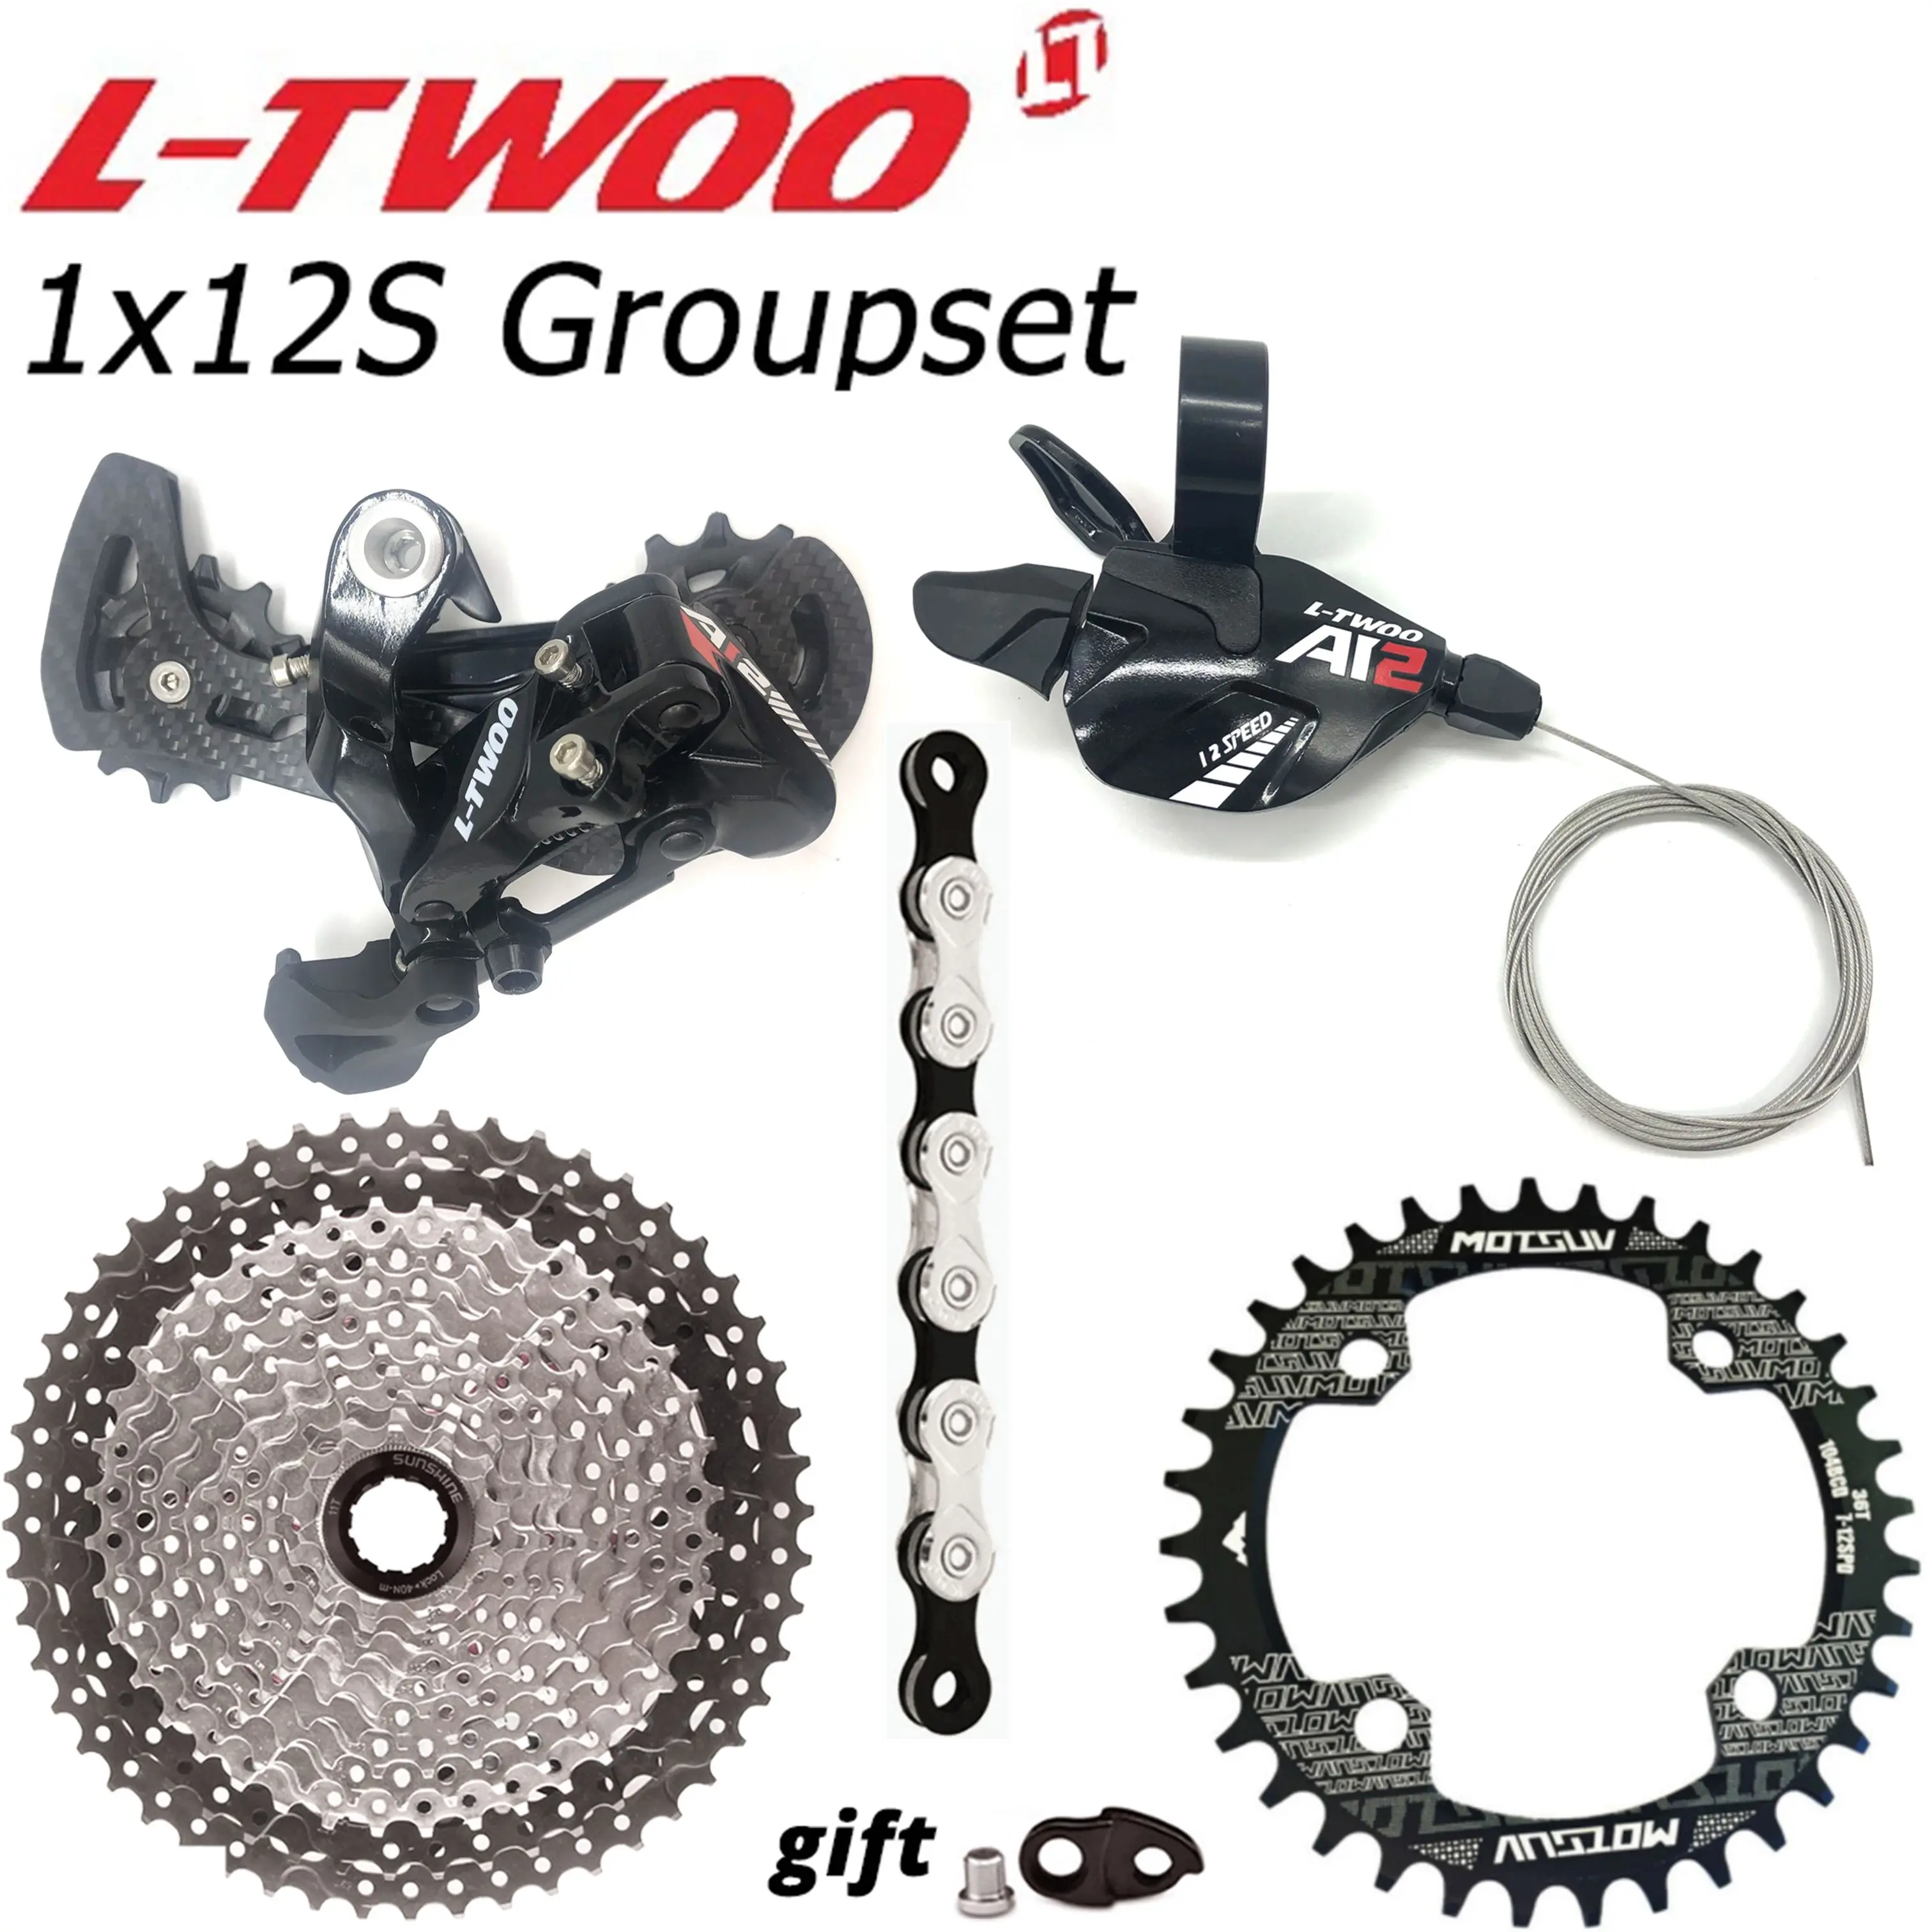 

LTWOO AT12 1X12S Groupset 12 Speed Shift Lever Derailleur SUNSHINE Cassette 46T 50T 52T KMC X12 Chain 104BCD Chainring 32-38T